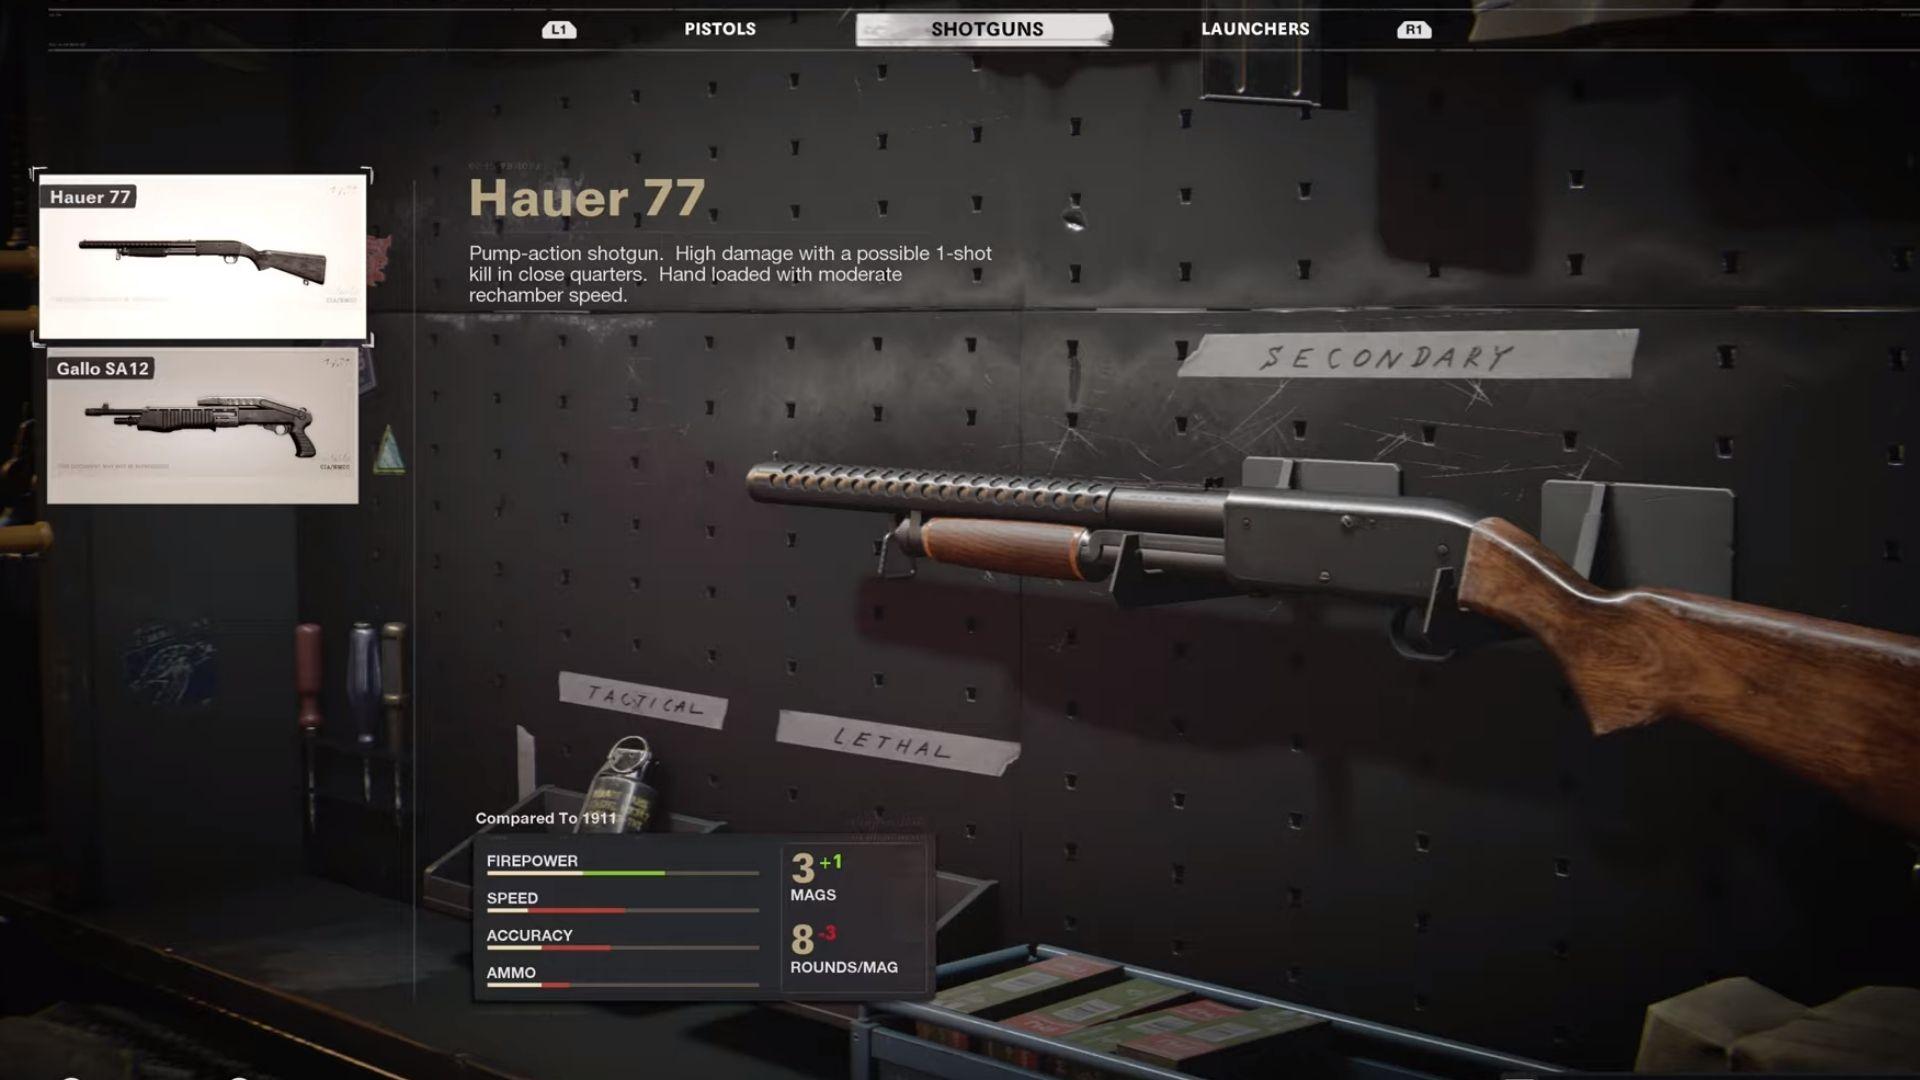 Hauer 77 in cod black ops cold war